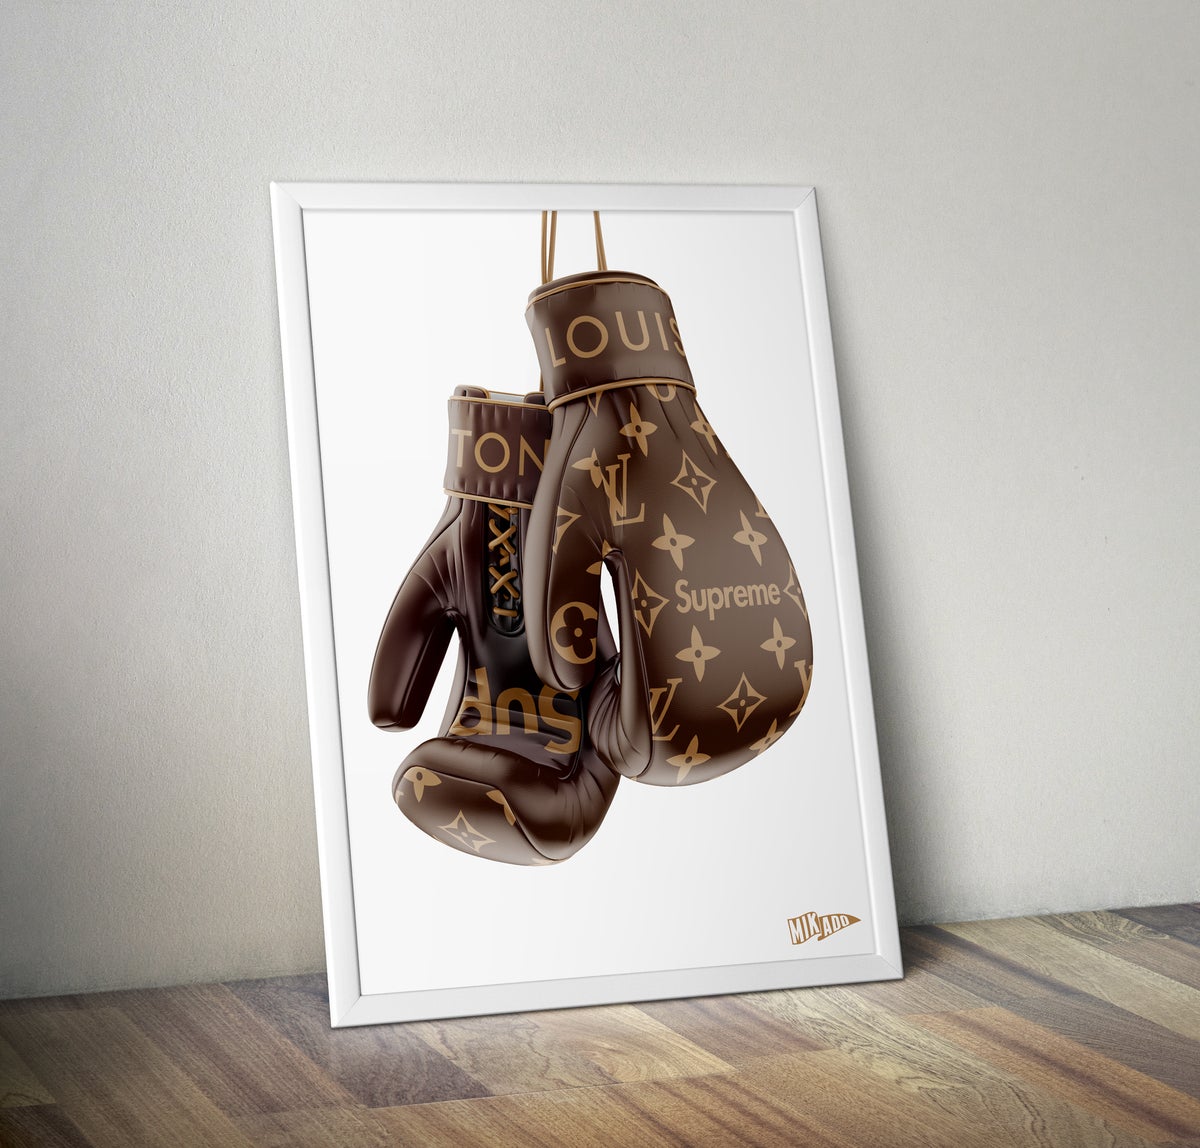 Mikadololo — SUPREME x LOUIS VUITTON BROWN BOXING GLOVES limited prints - Shipped Worldwide